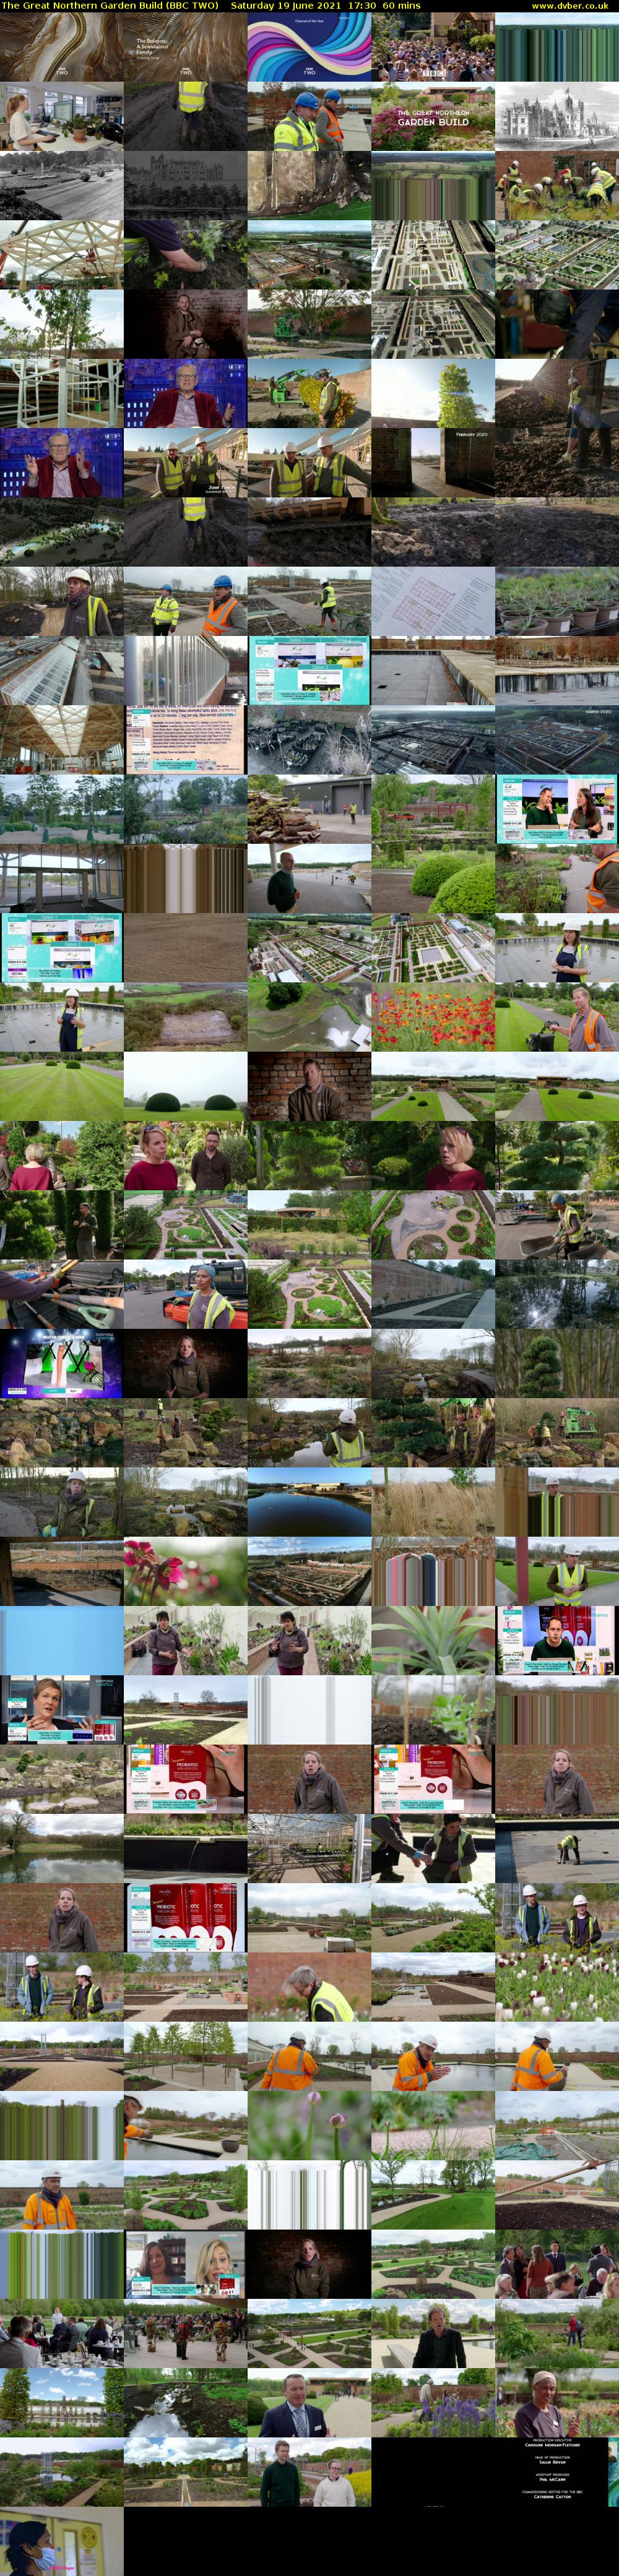 The Great Northern Garden Build (BBC TWO) Saturday 19 June 2021 17:30 - 18:30